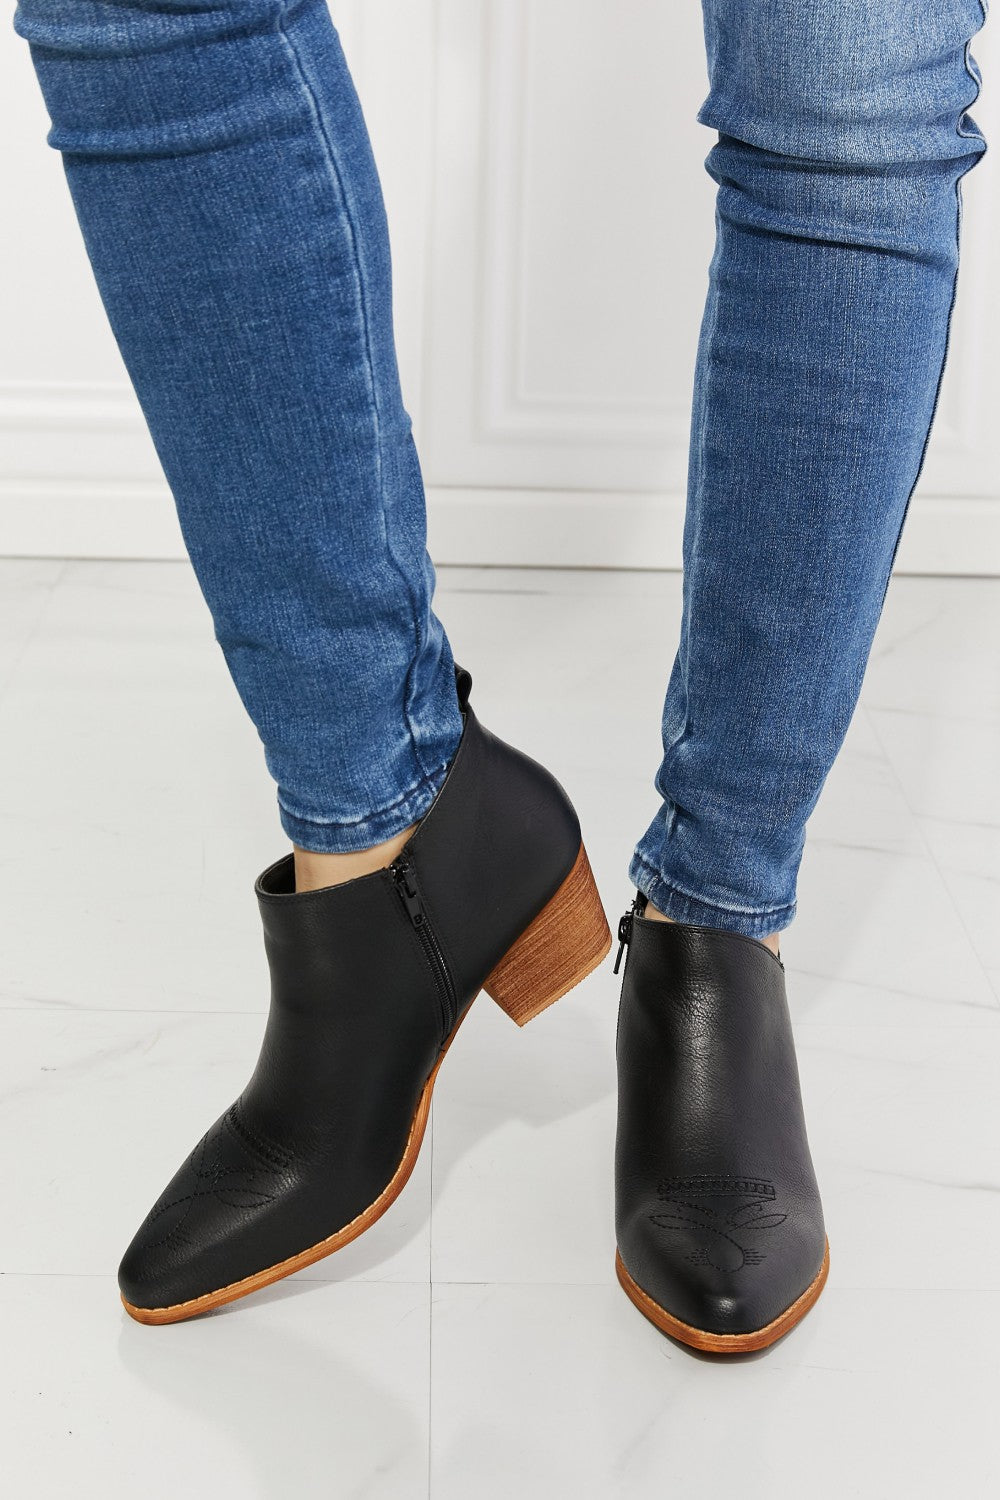 Trusty - Embroidered Crossover Cowboy Bootie in Black